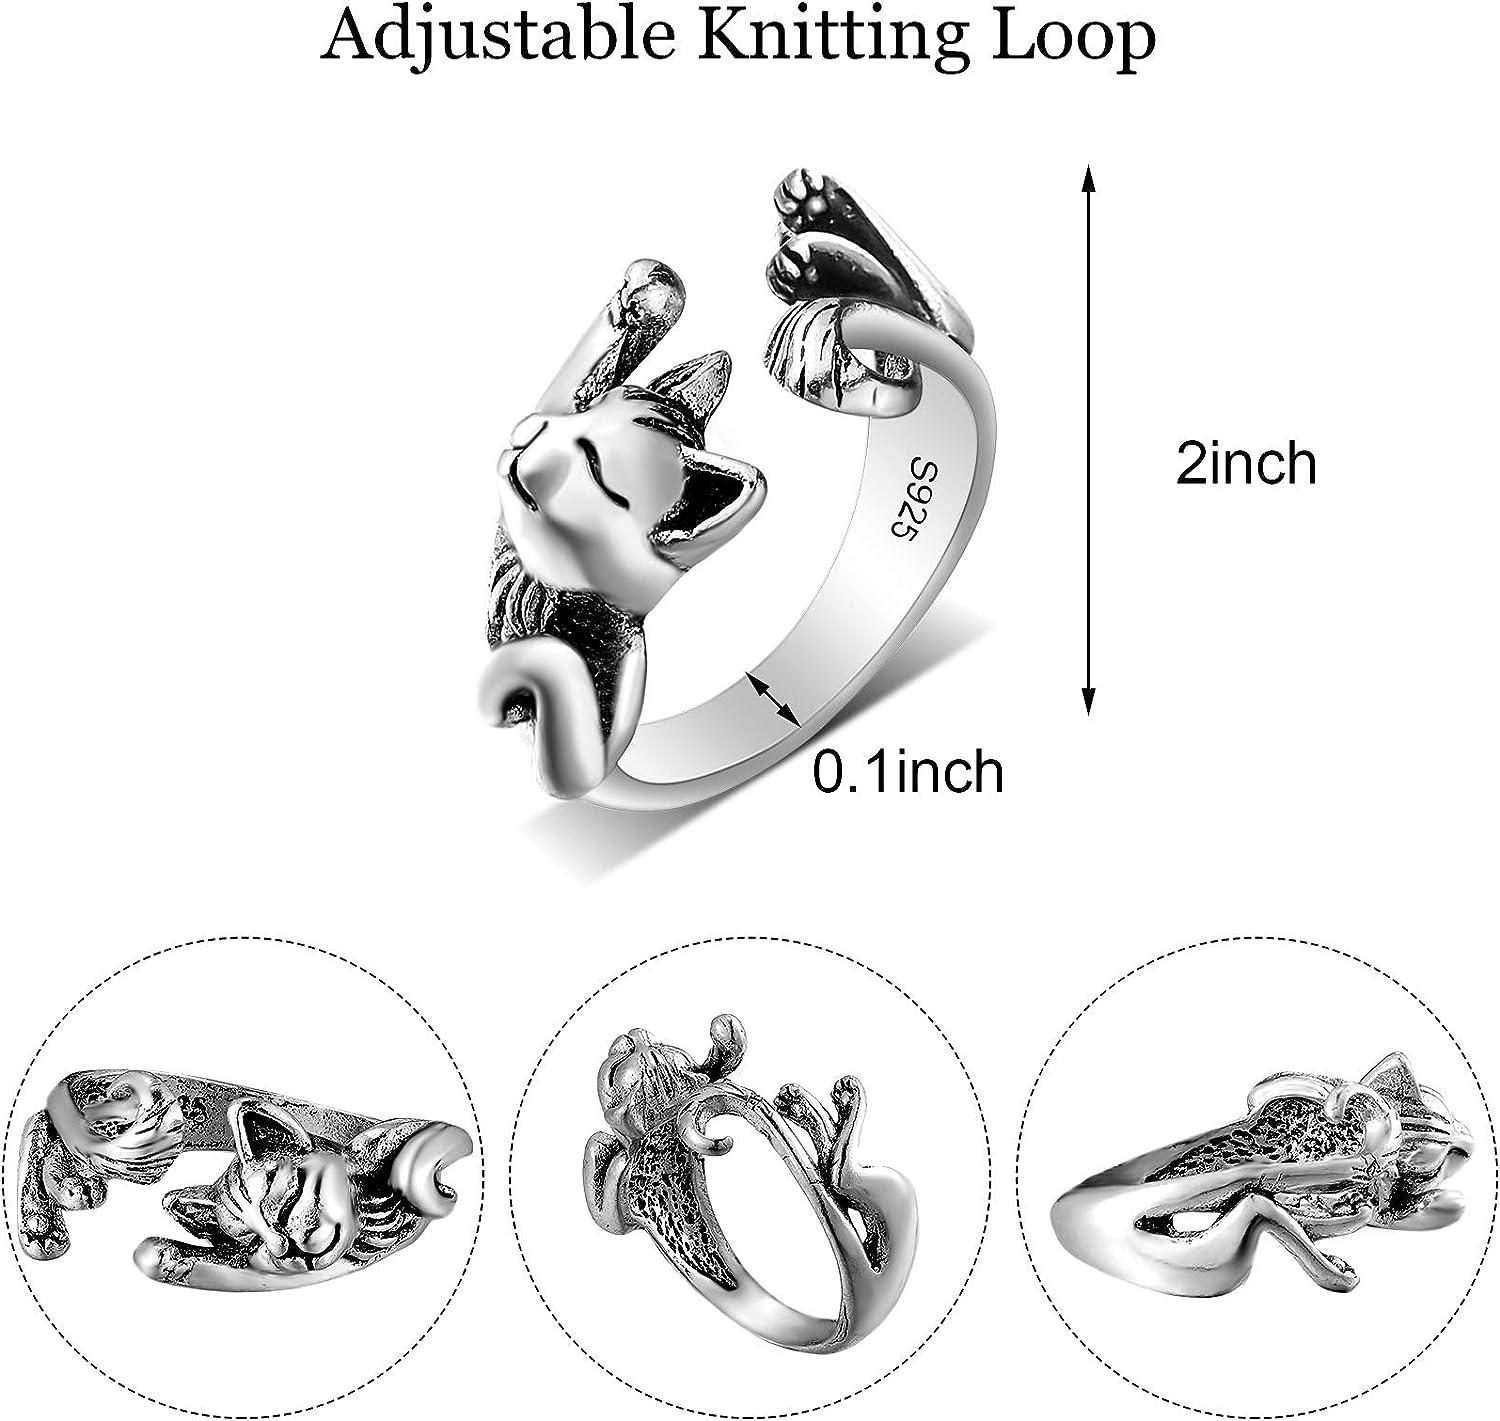 Gift Animal Multifunction Alloy Knitting Loop Fashion Jewelry Home Vintage  Adjustable Size Crochet Ring Cat Shape Guide